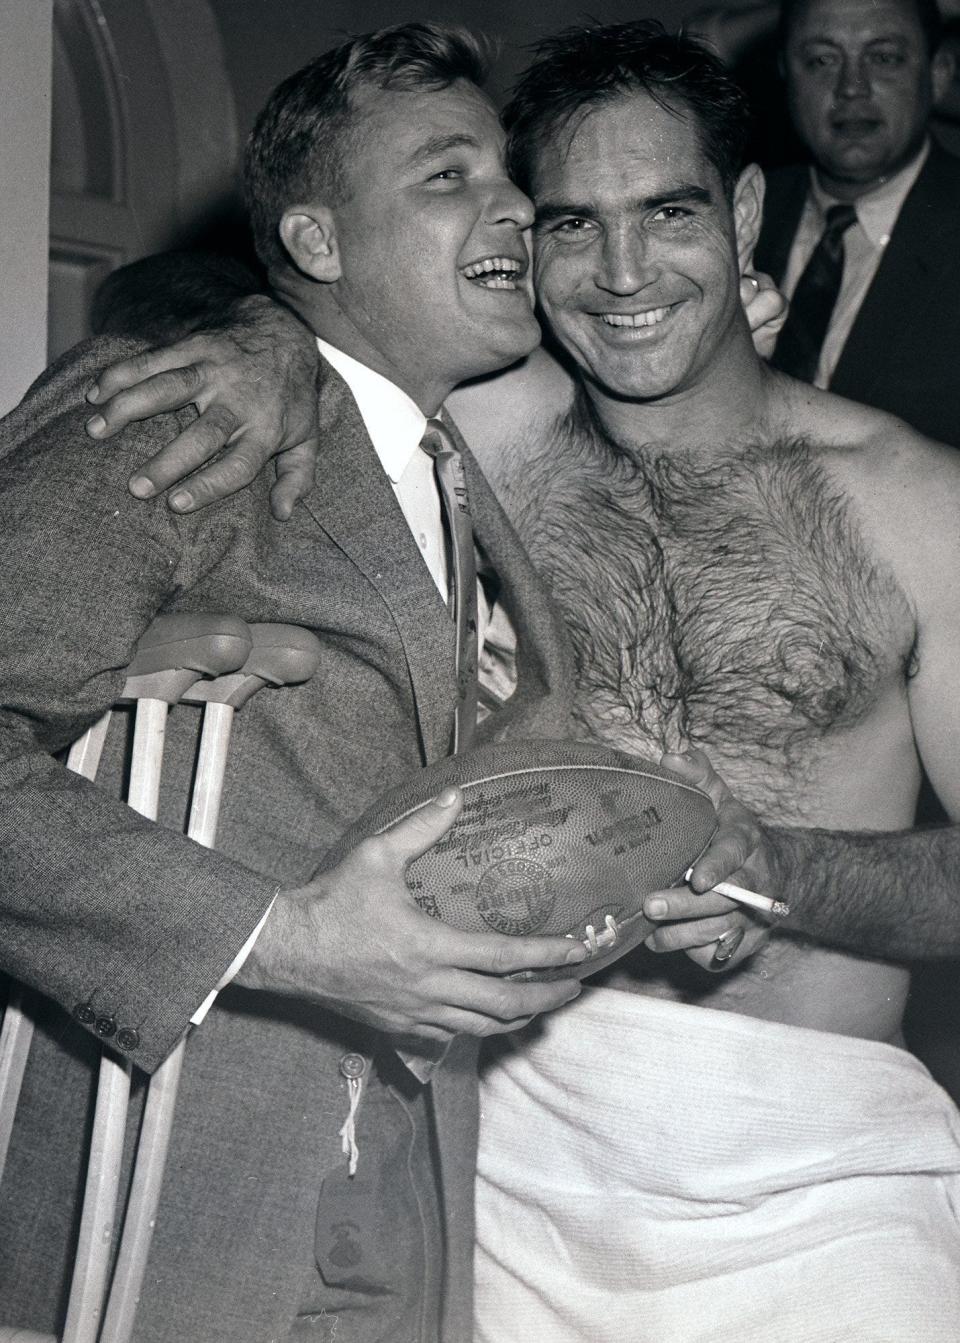 Detroit Lions quarterback Bobby Layne, left, who broke his ankle prior to the game, hugs quarterback Tobin Rote after the Lions beat the San Francisco 49ers in the Western Conference championship in this Dec. 22, 1957 file photo in San Francisco. Detroit went on to beat the Cleveland Browns in the NFL Championship, at Tiger Stadium.